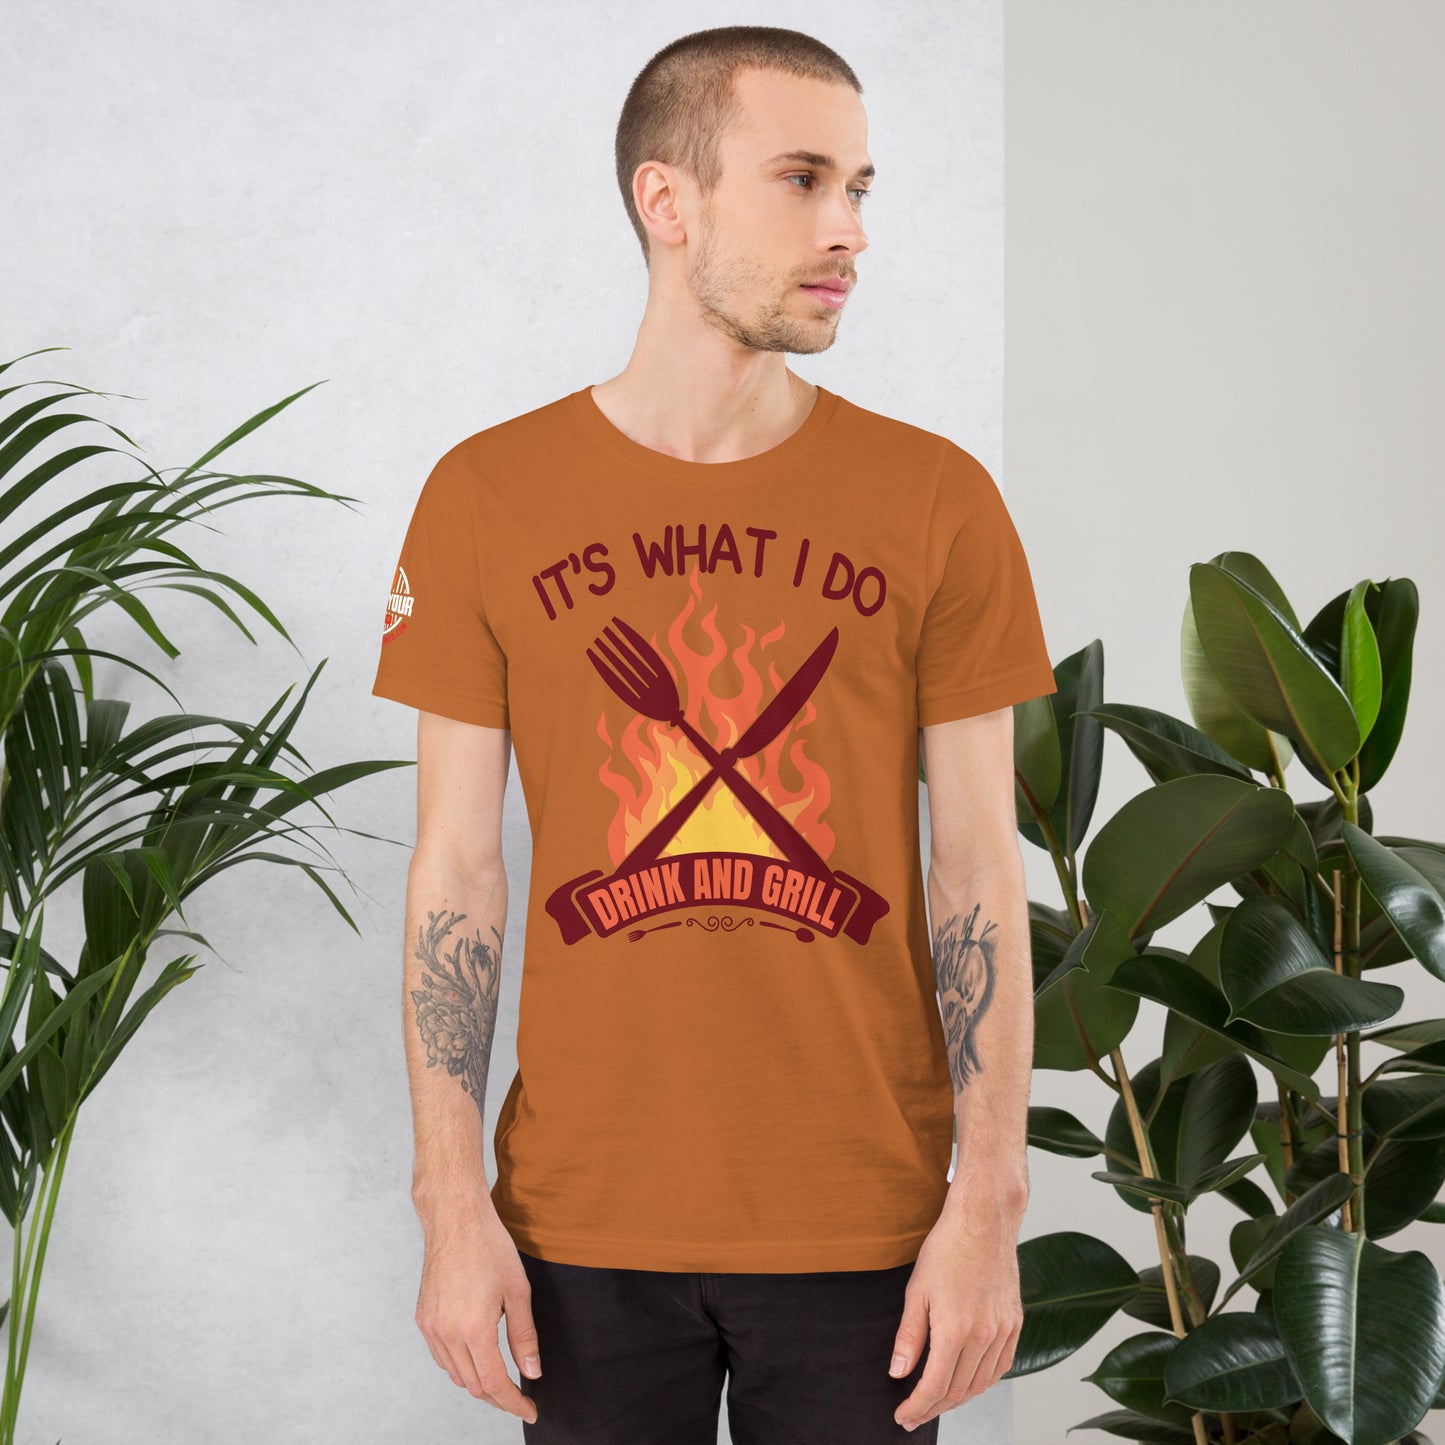 It's What I Do T-shirt